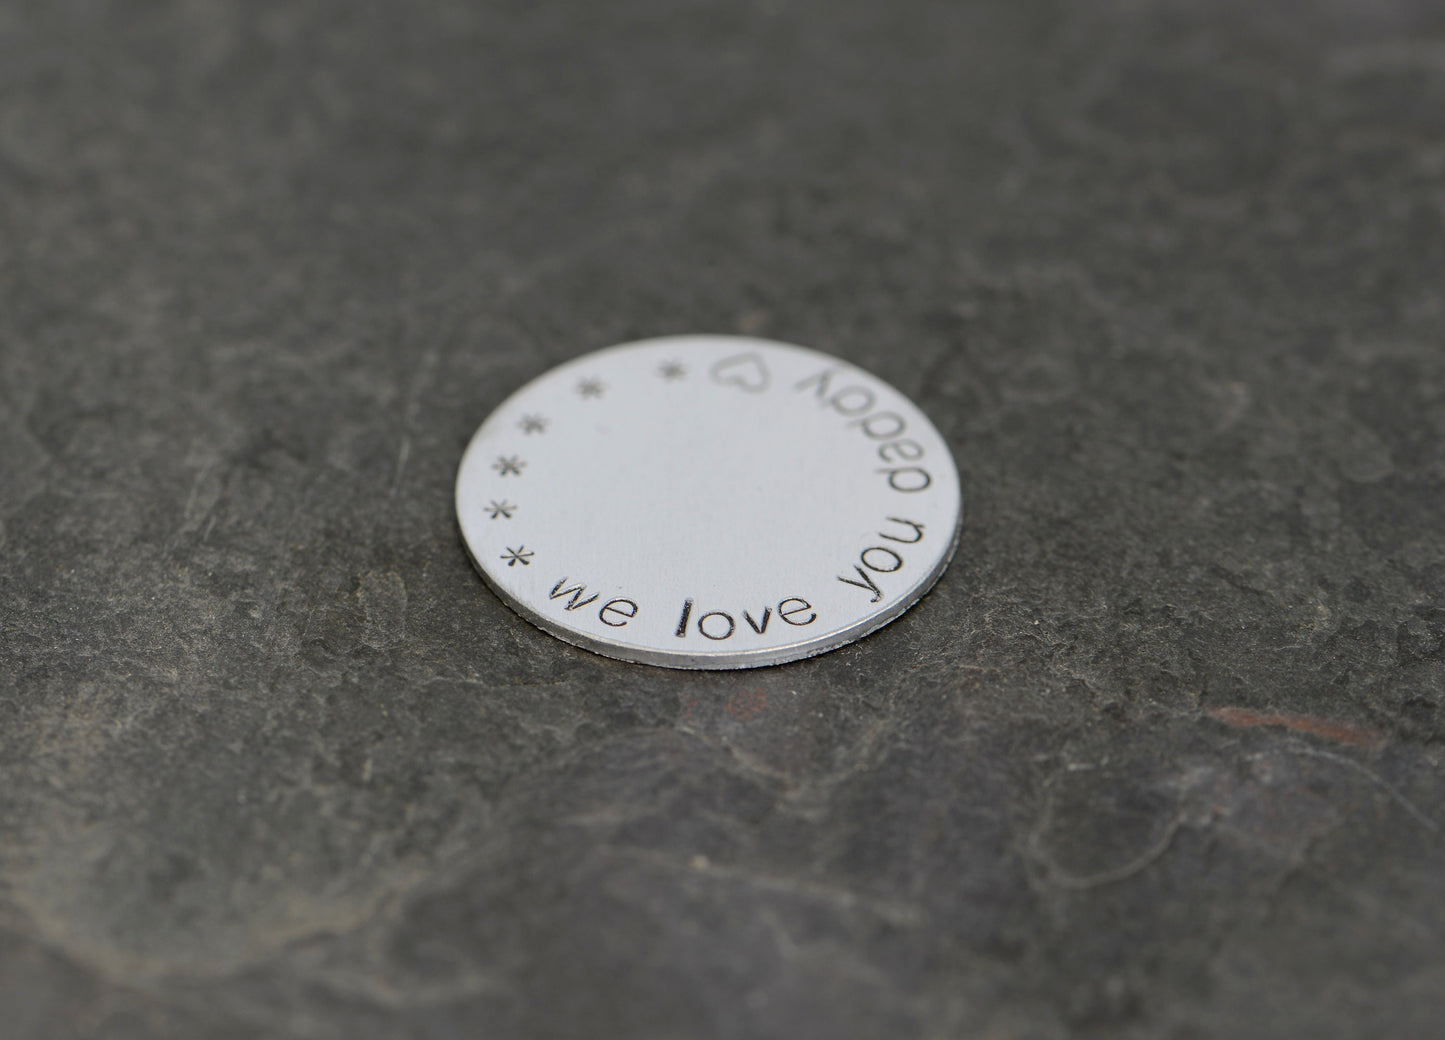 We love you daddy aluminum golf ball marker - gifts for Dad